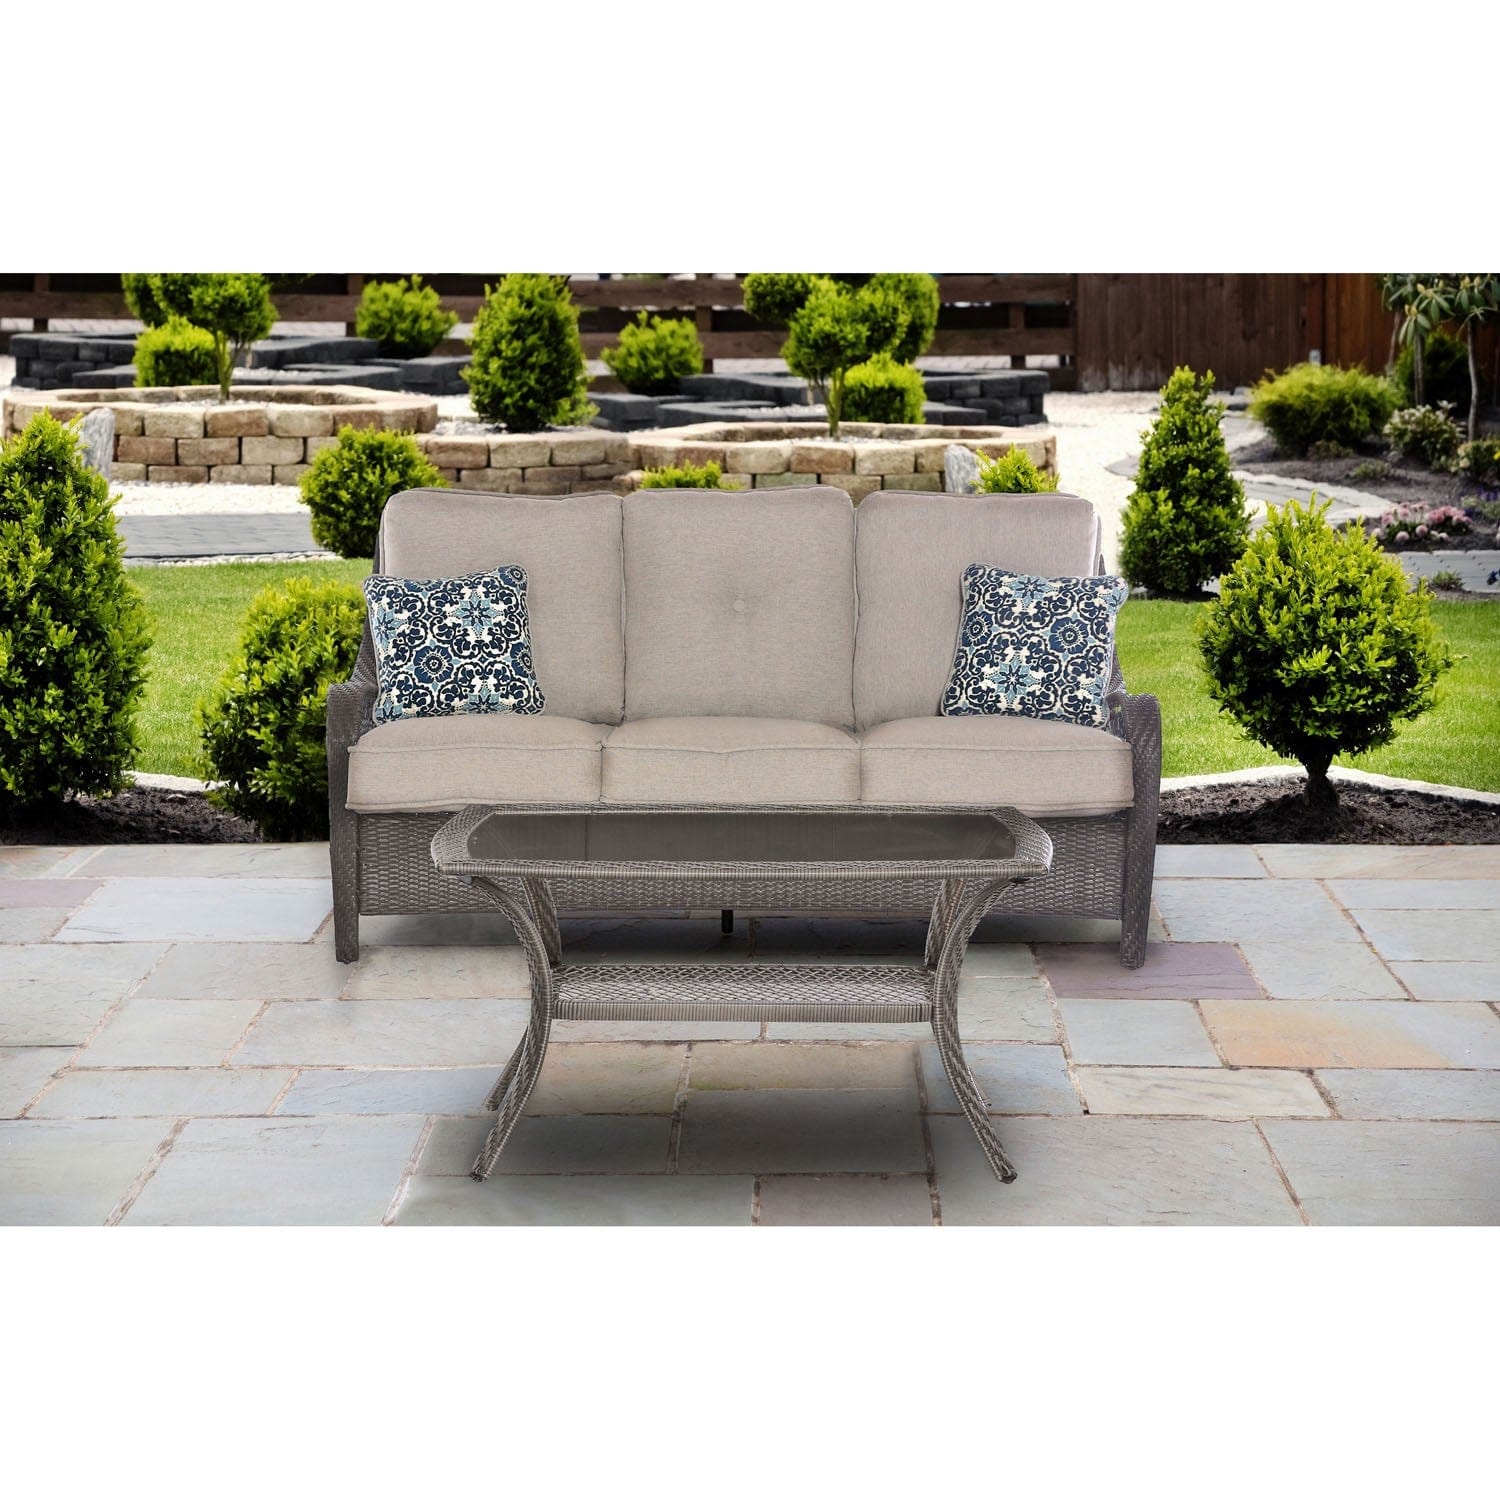 Hanover Conversation Set Hanover Orleans 2-Piece Wicker Patio Set in Heather Gray with Gray Weave | ORLEANS2PC-G-SLV